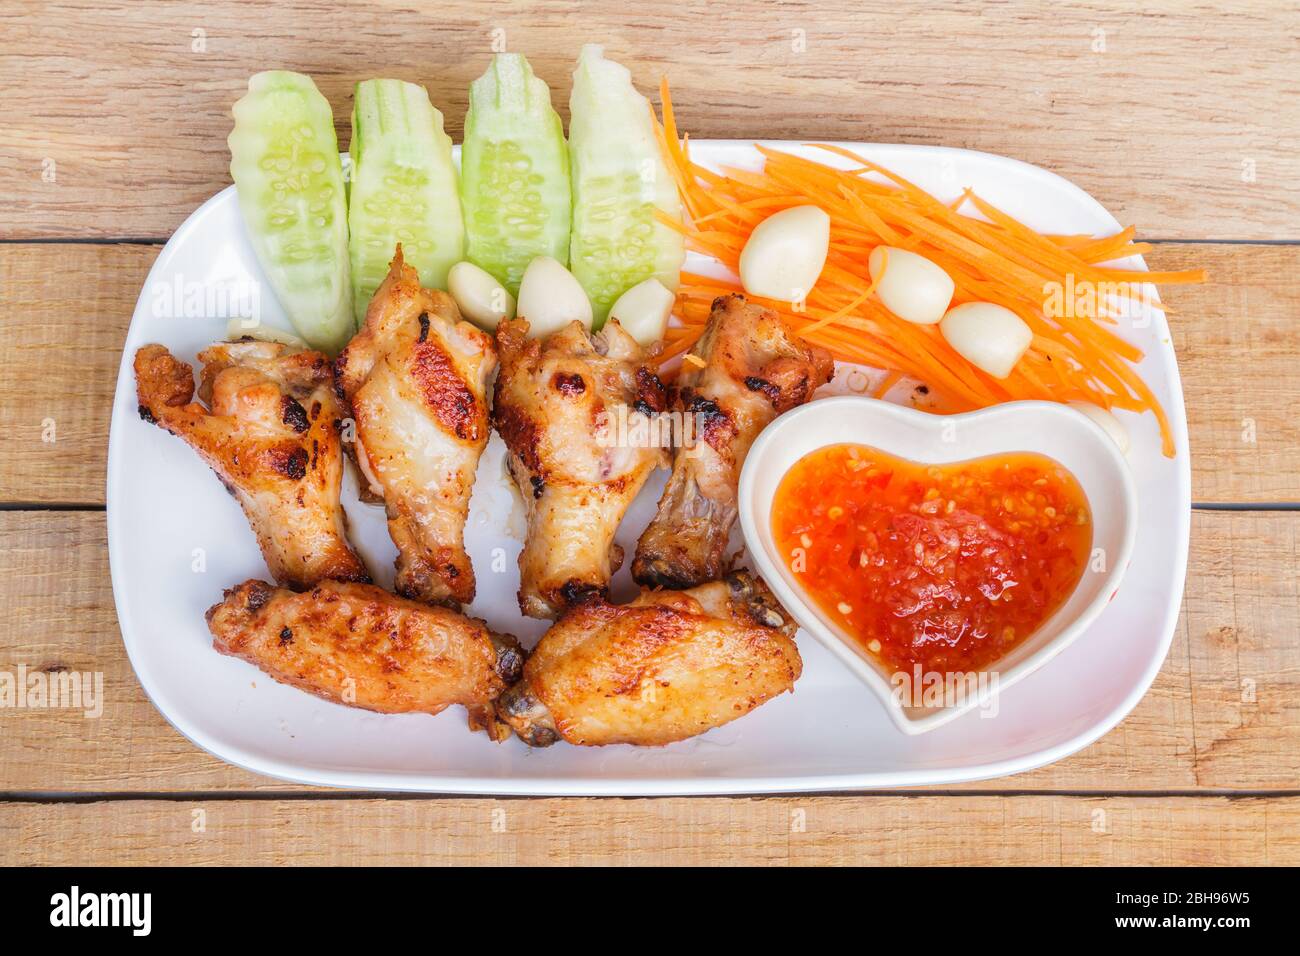 Fried chicken with fish sauce Stock Photo